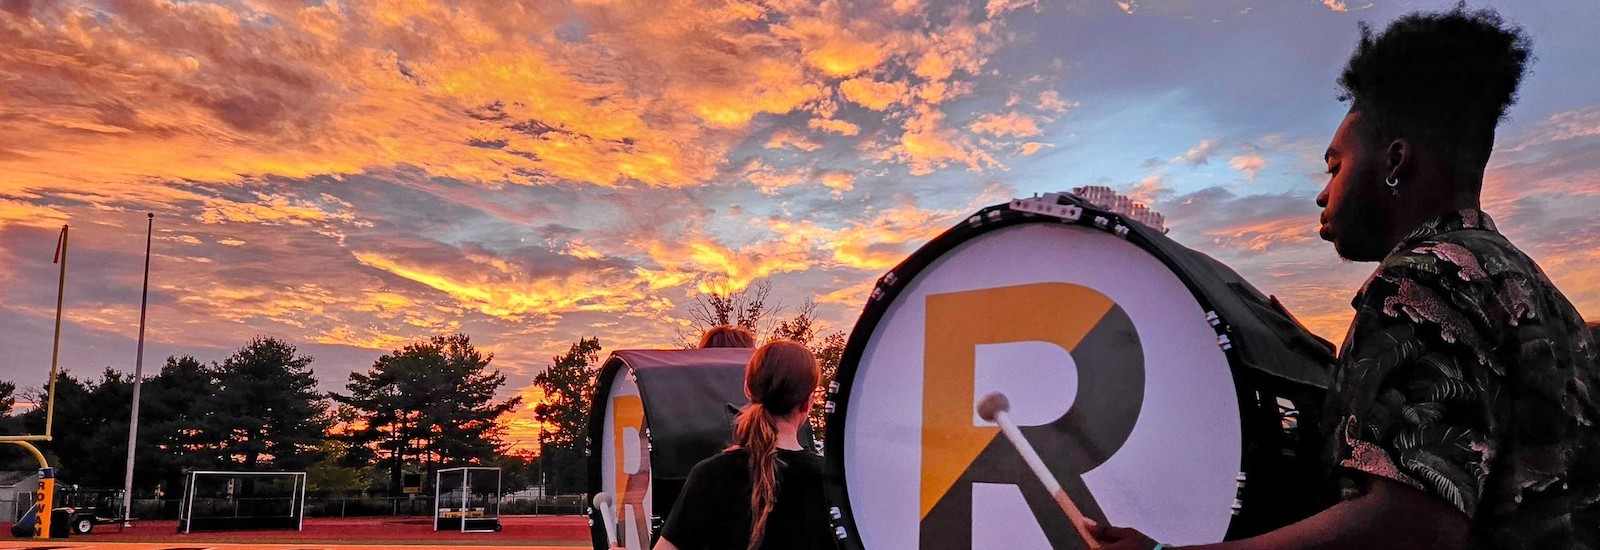 A close up of the Rowan University marching band drum major practicing on the athletic field with a dramatic sunset in front of him.